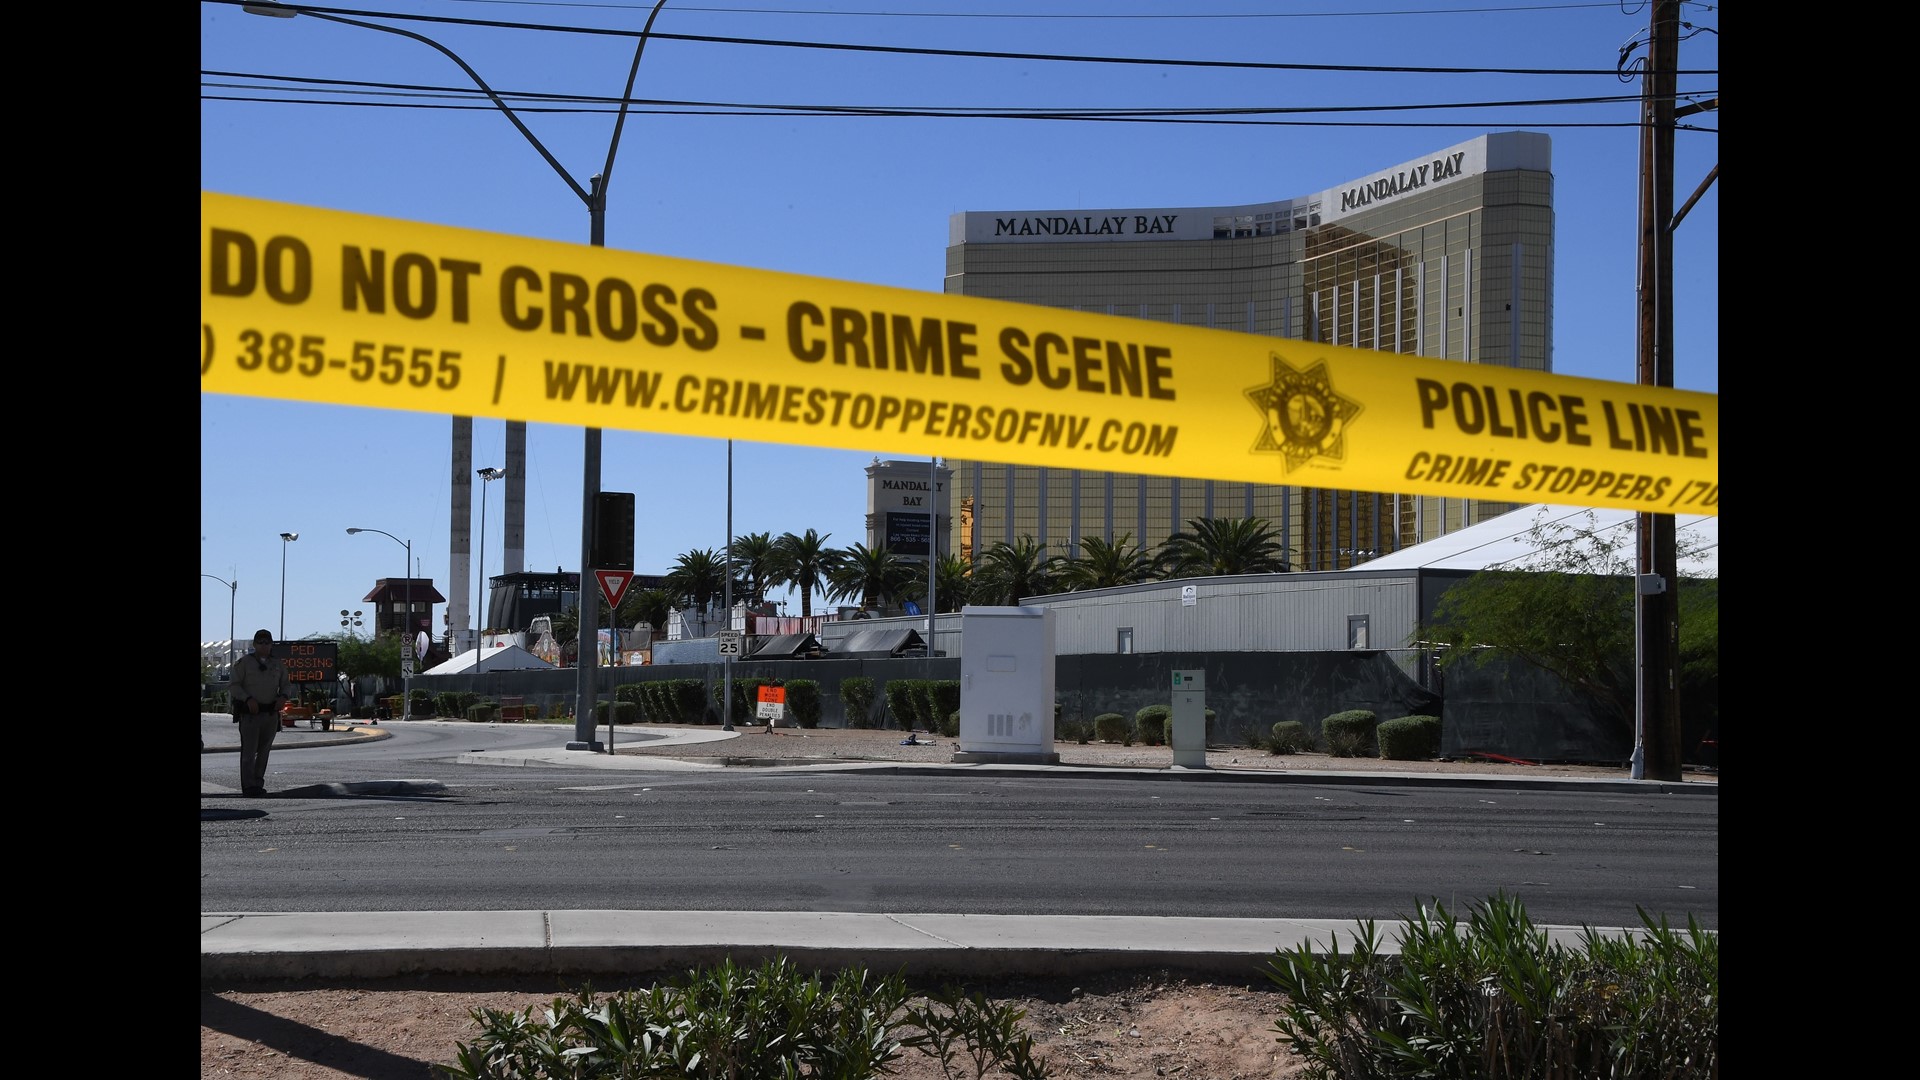 Cbs Fires Top Lawyer Over Comments On Las Vegas Victims